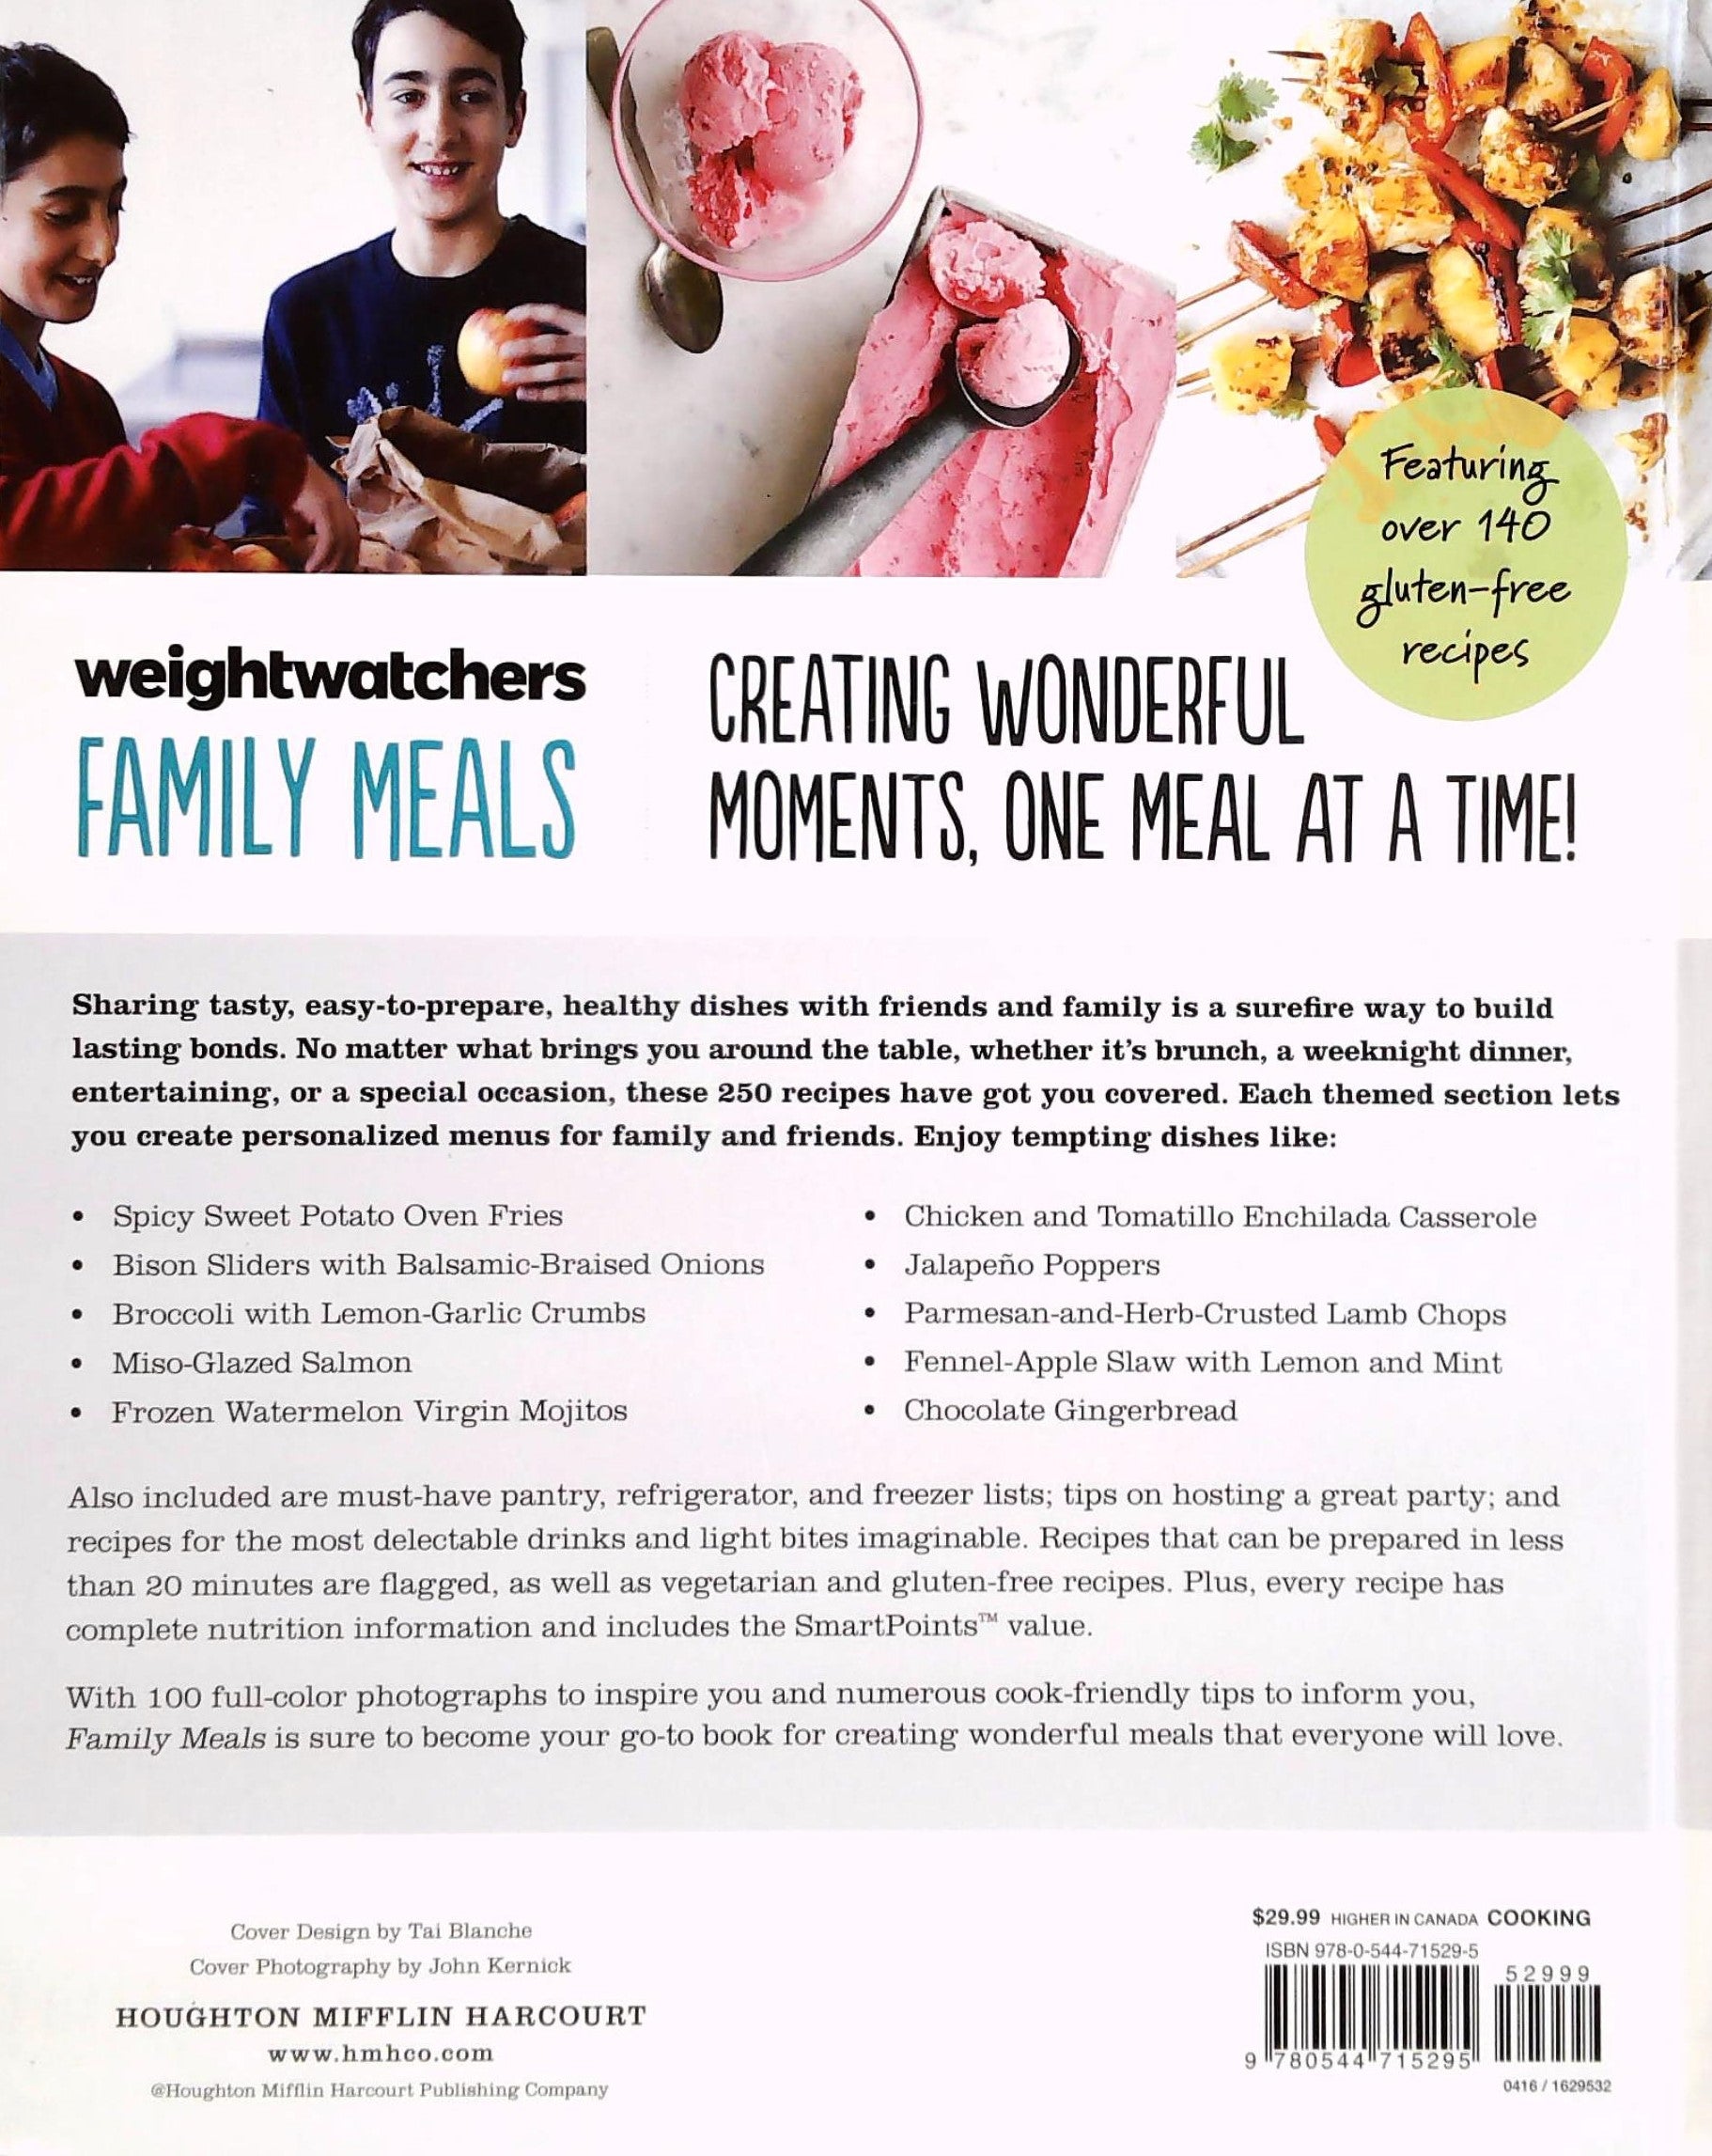 Family Meals : 2560 Receipes for Bringing Family, Friends, and Food Together (WeightWatchers)